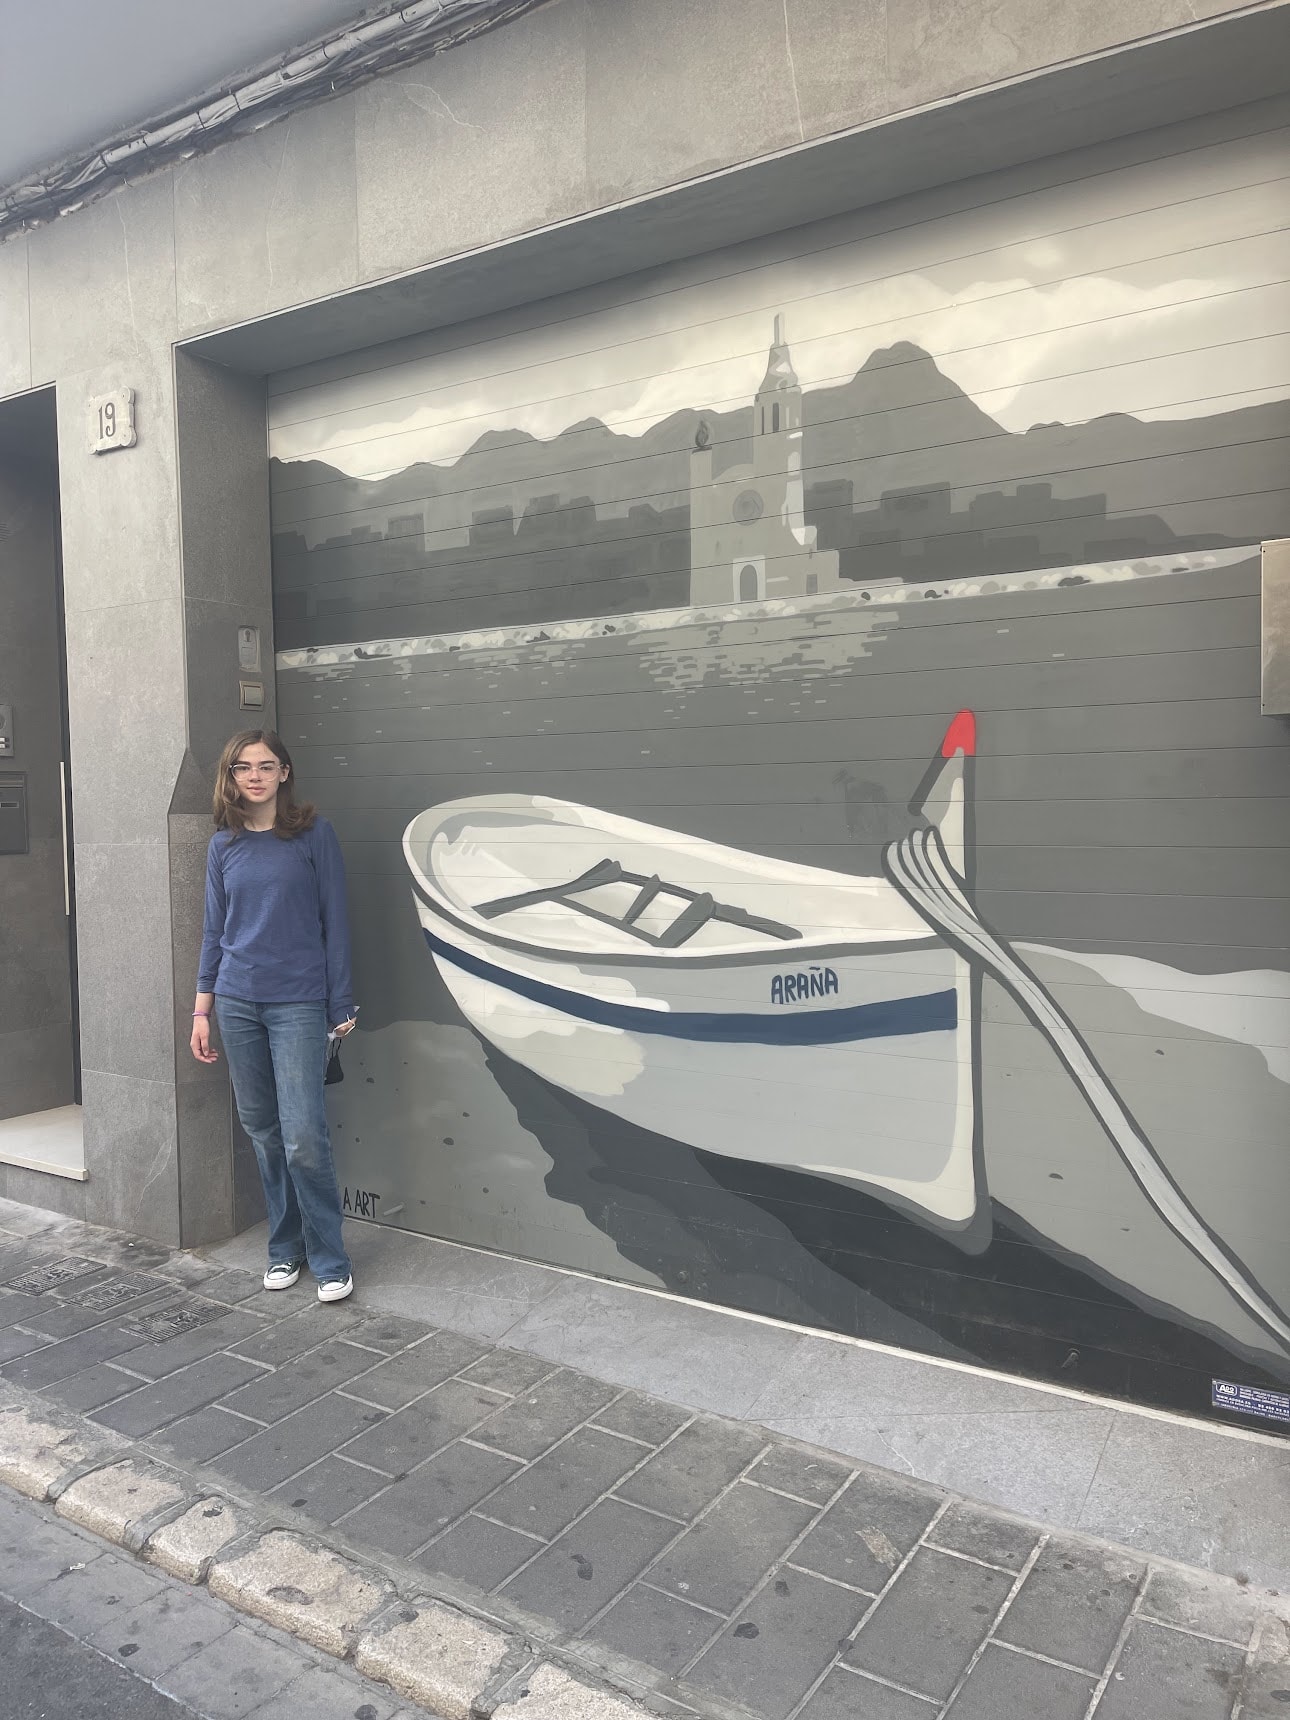 A mural of a boat in Sitges Spain